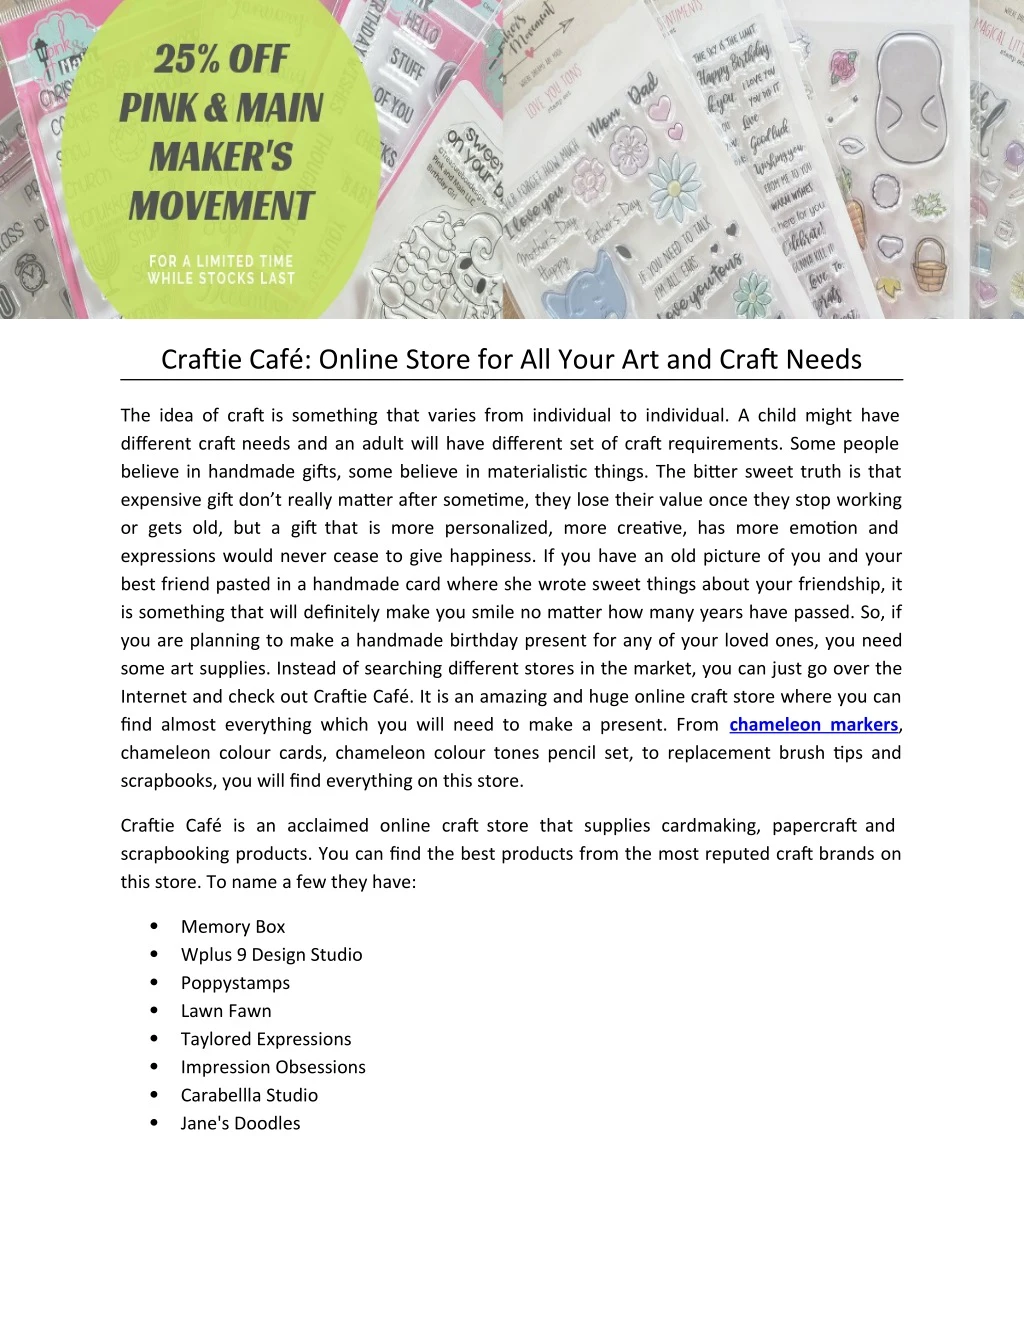 craftie caf online store for all your